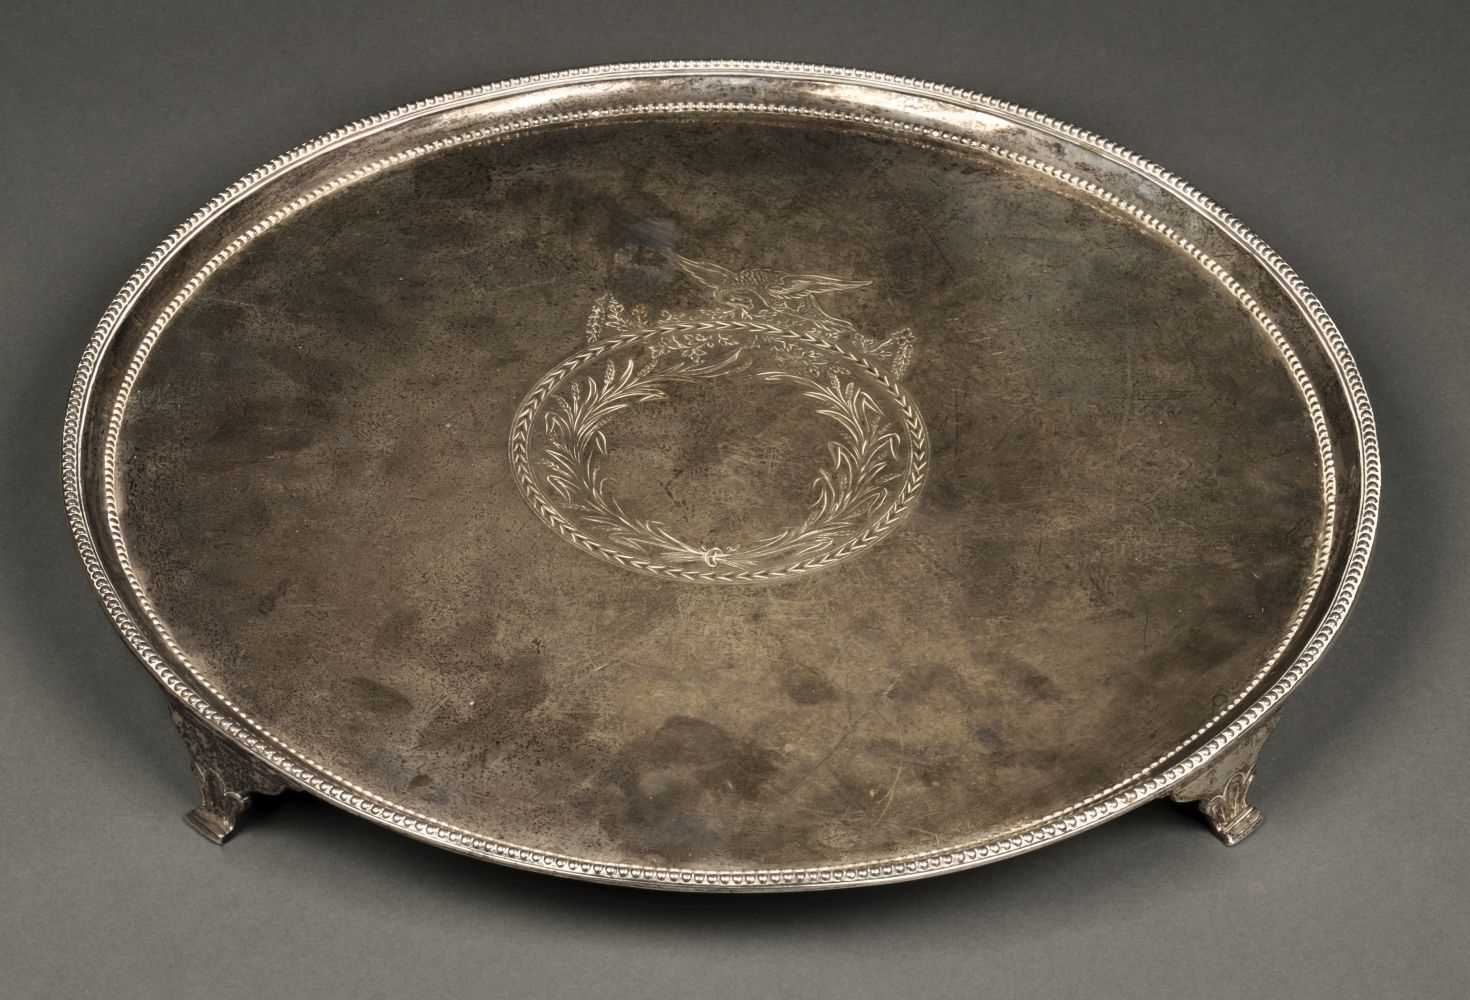 Lot 43 - Salver. George III silver salver by Richard Rugg, London 1782